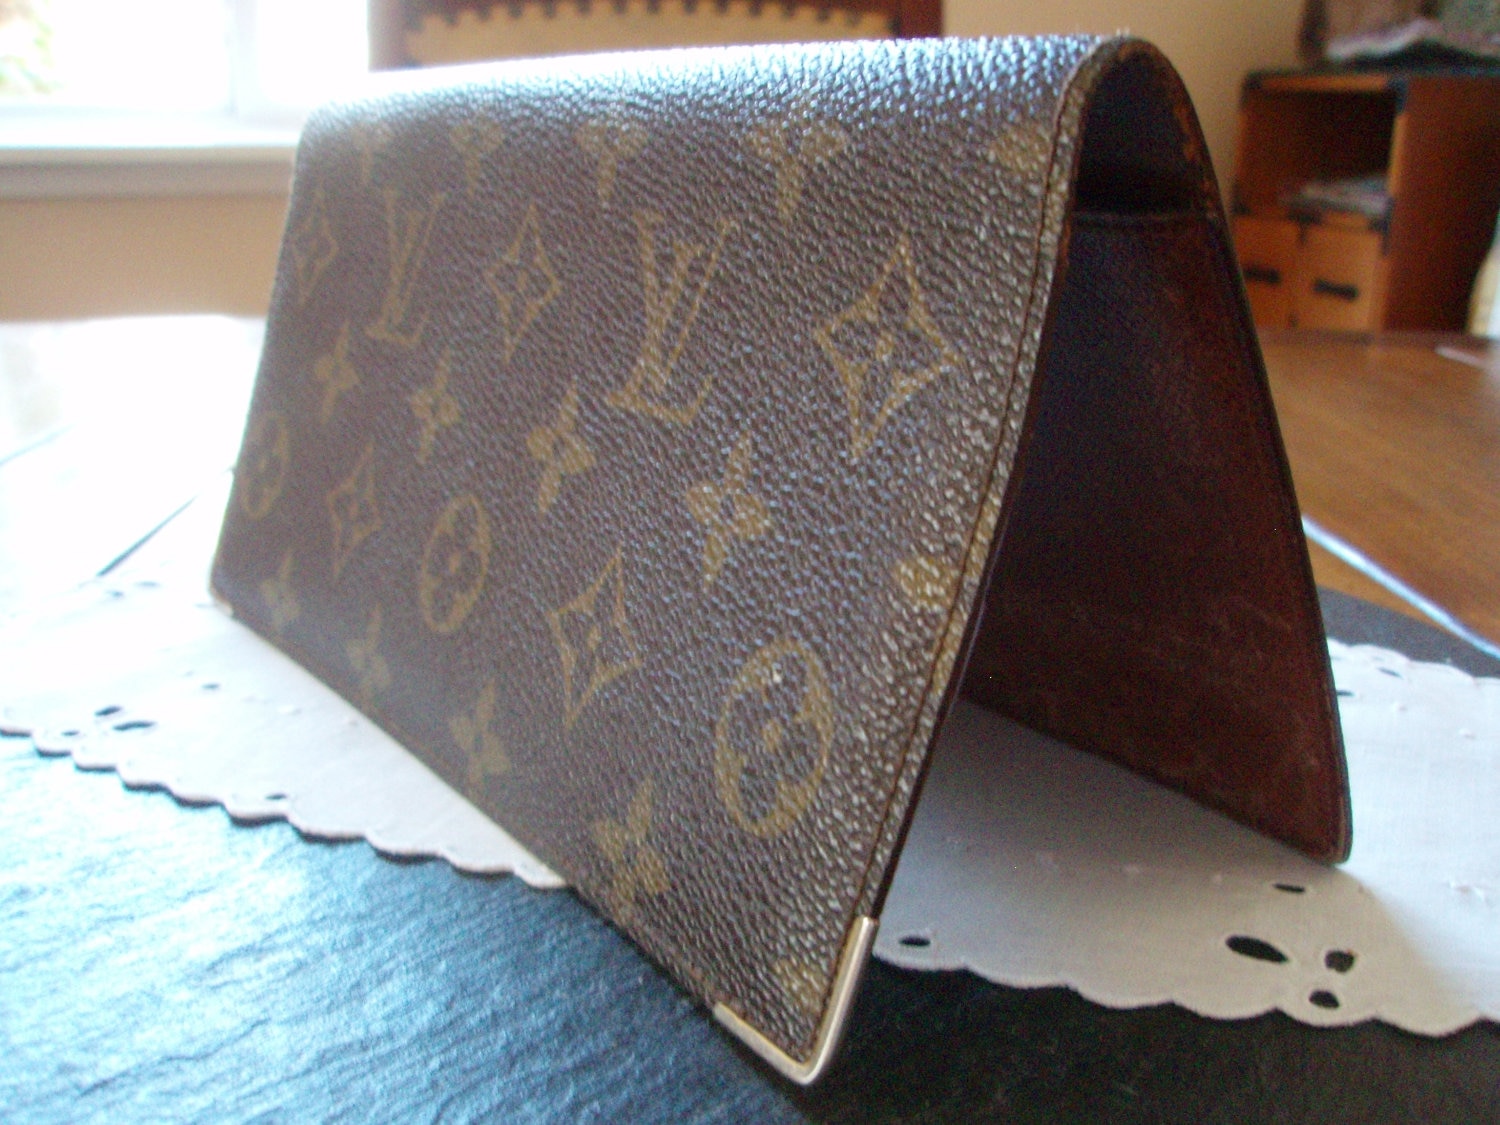 authentic 80s Louis Vuitton wallet & gold by thedestinyofthings